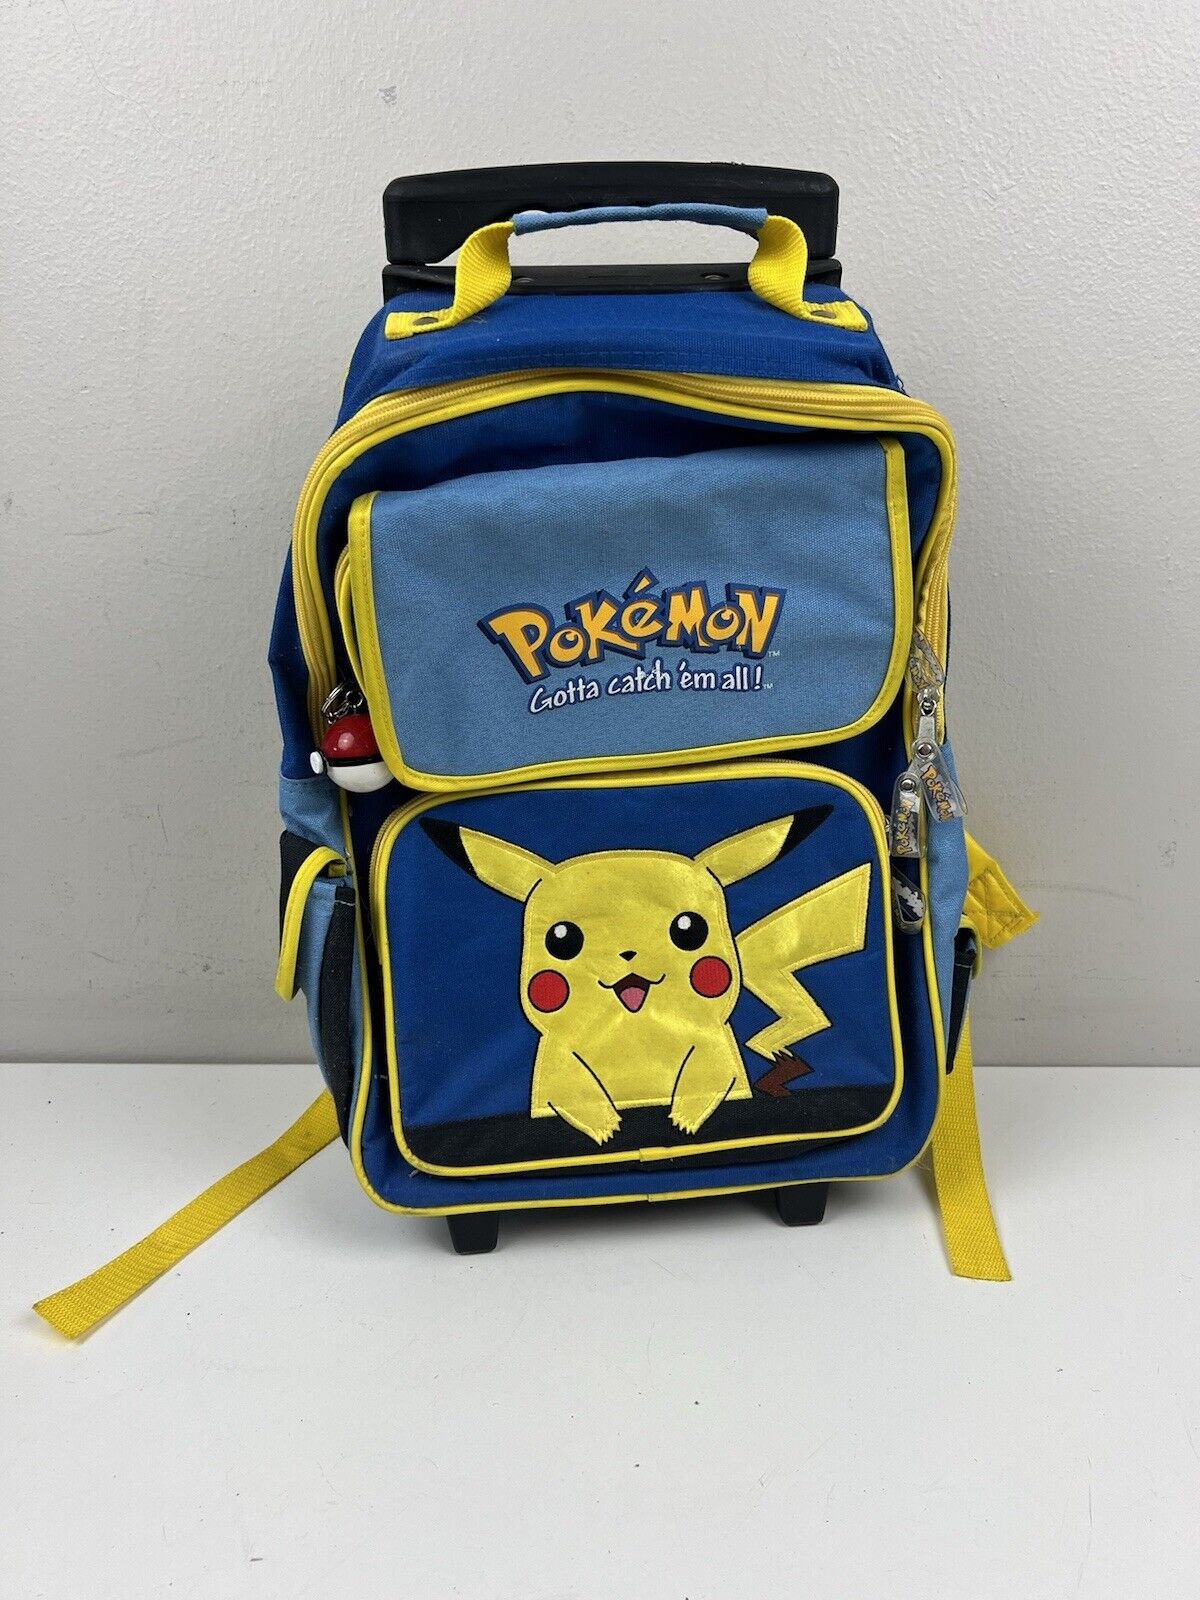 Vintage Pokemon Pikachu Rolling Backpack 1999 Suitcase Yellow Blue